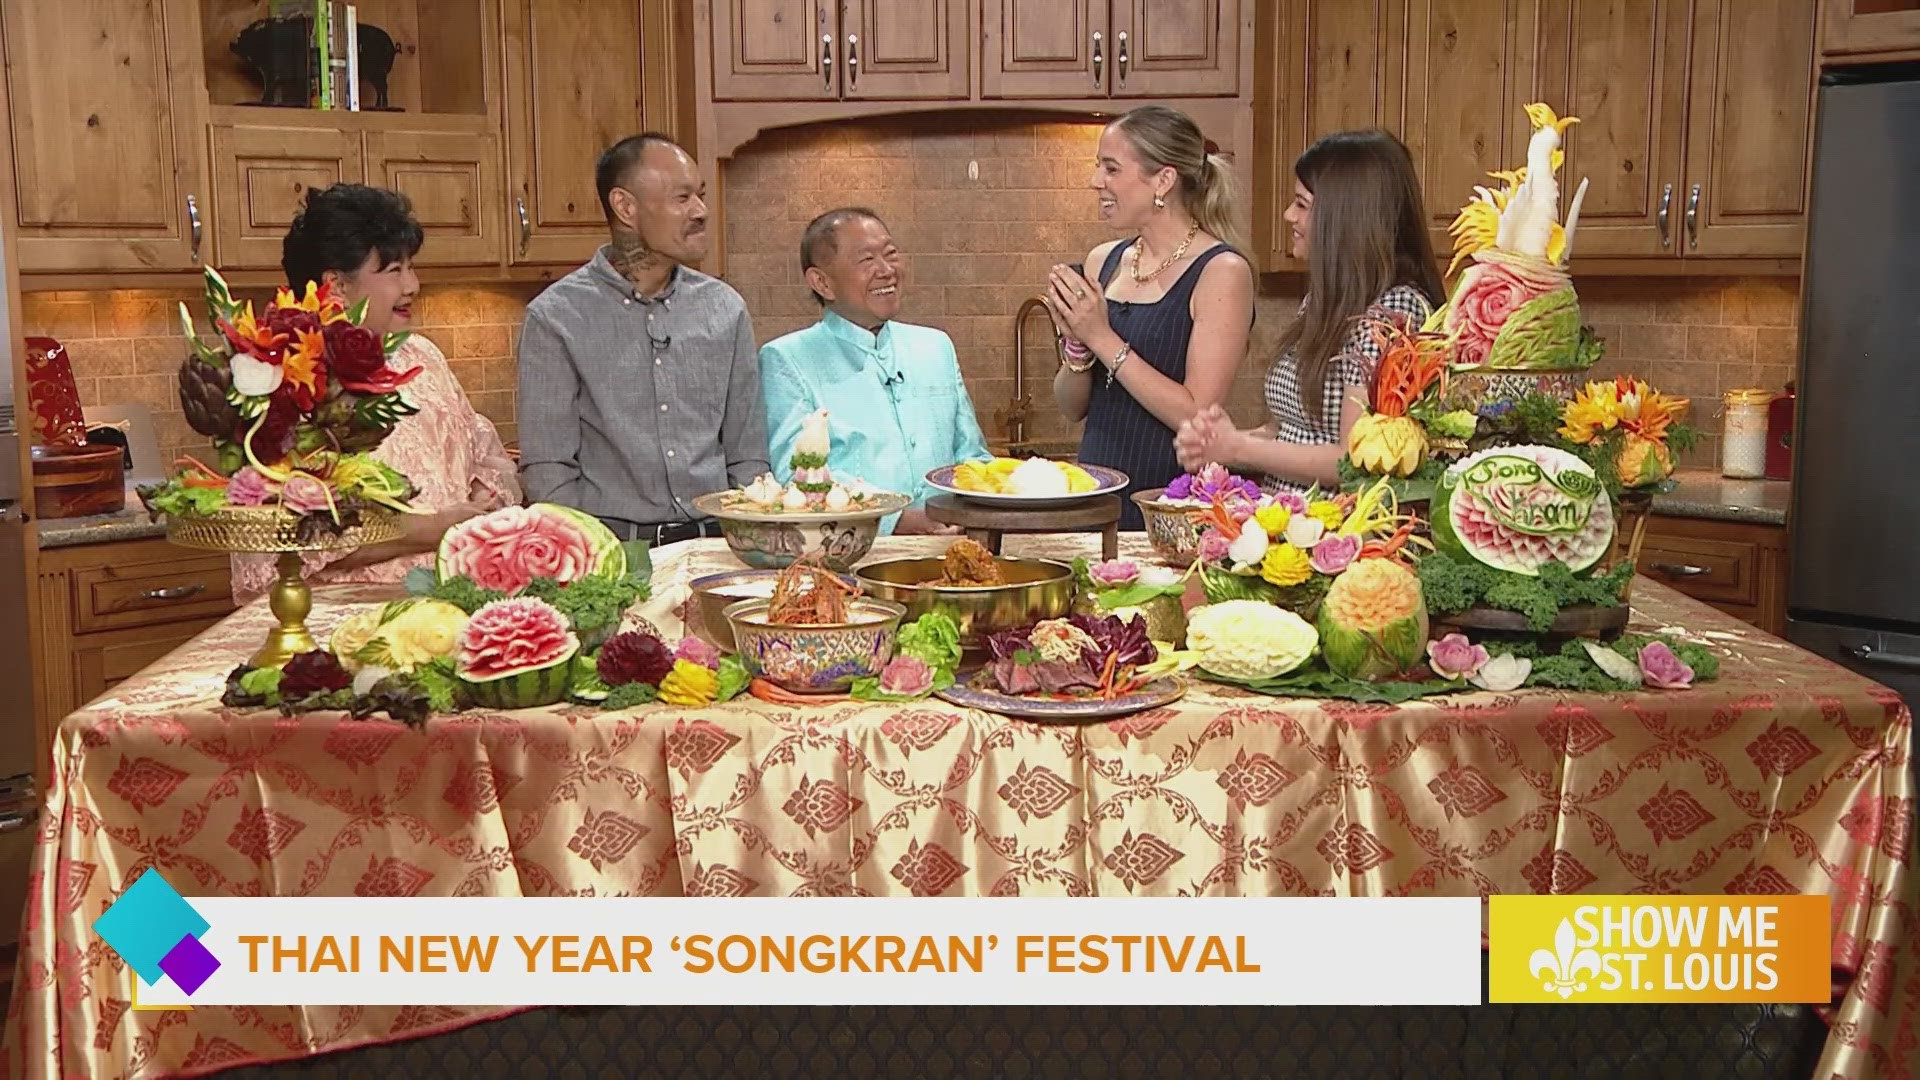 This year's Songkran Festival celebrating Thai New Year is coming up on Sunday, April 21.